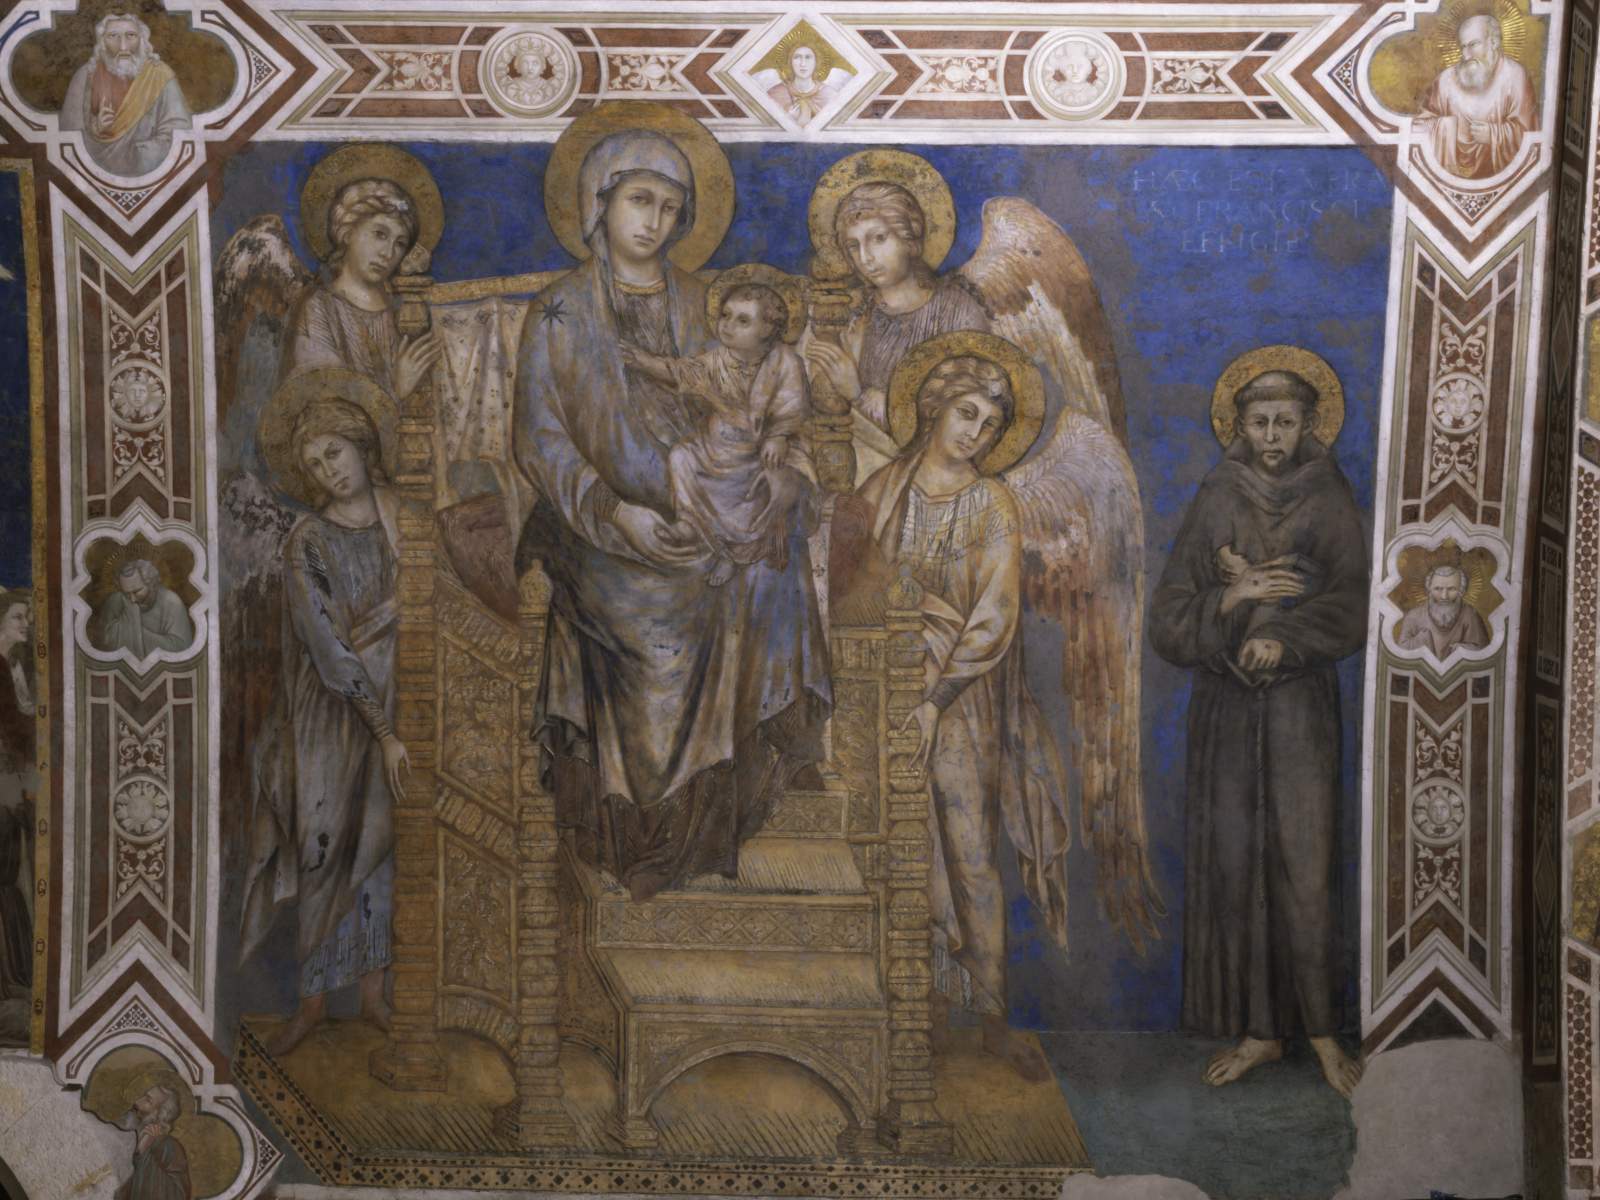 Cimabue's Majesty of Assisi restored. Original face of St. Francis unveiled. 